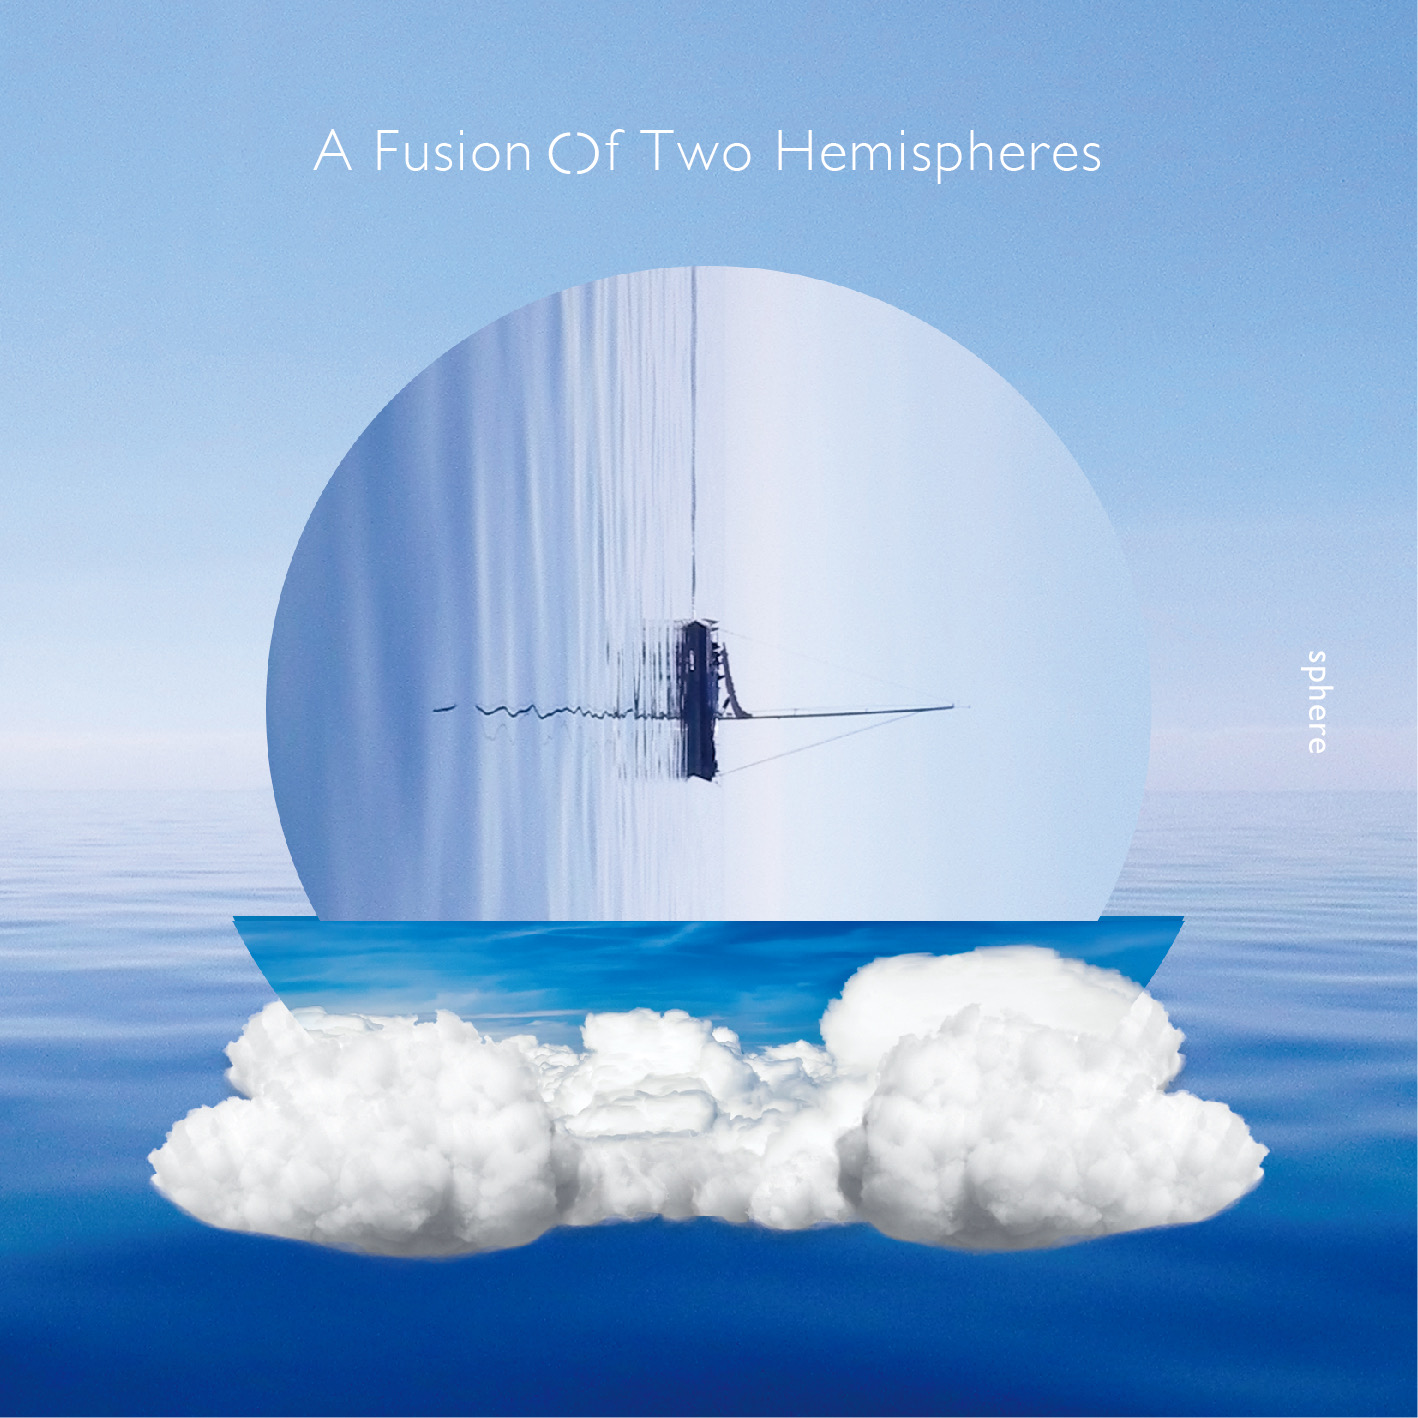 sphere release “ A Fusion Of Two Hemispheres”